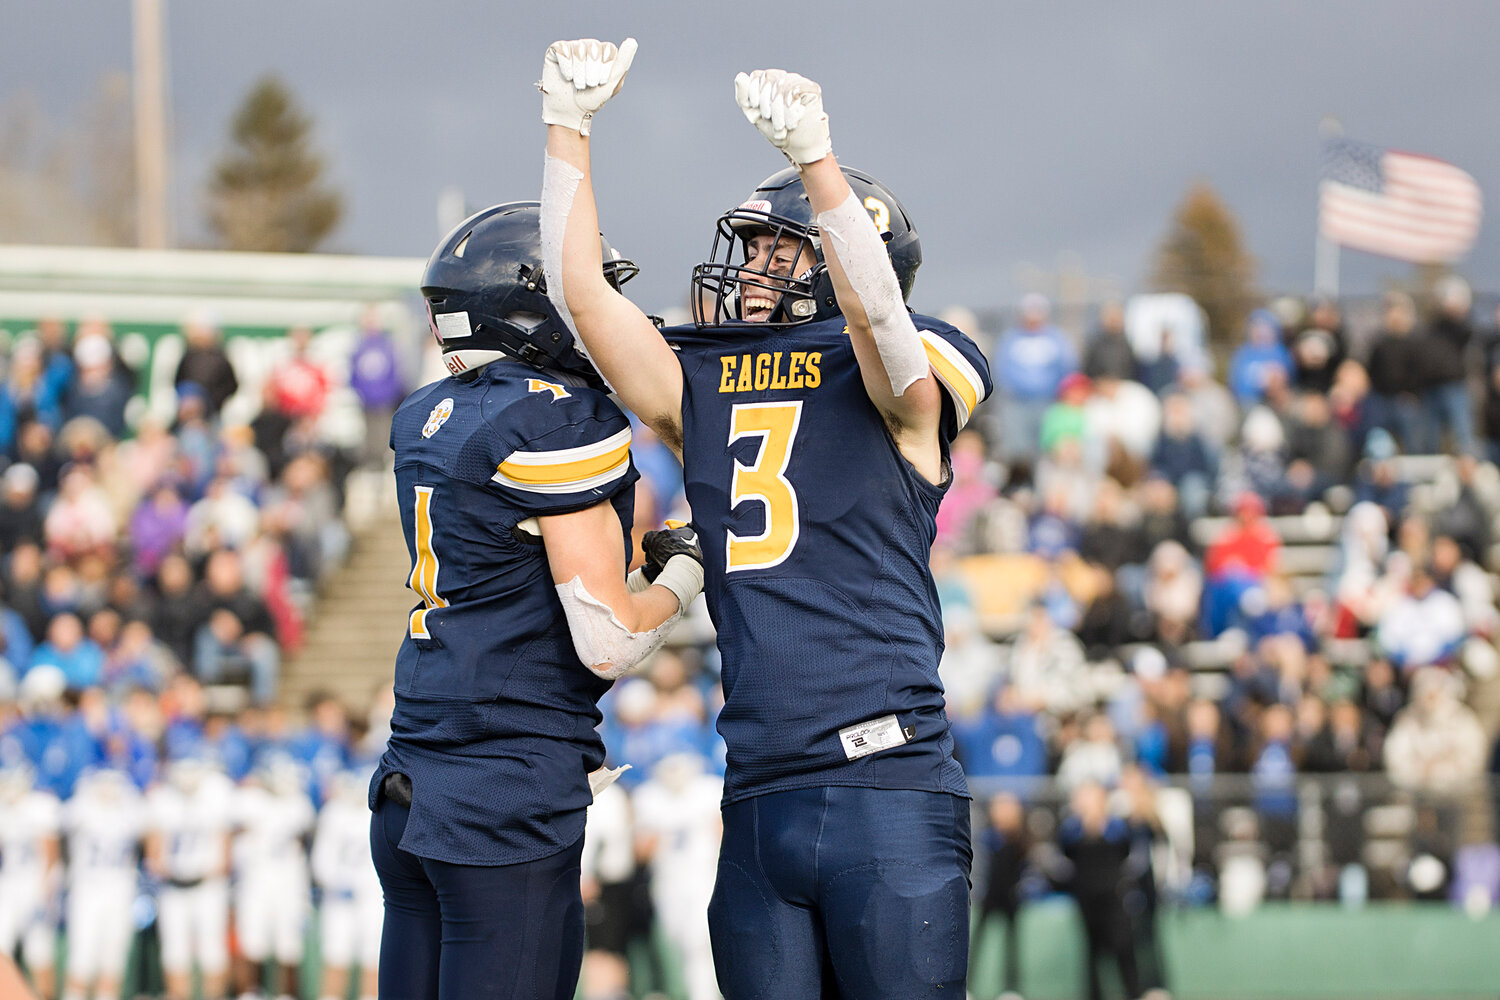 Jack Robinson (right) celebrates with Mitch Ivatts after catching a touchdown pass from Ivatts in the third quarter.